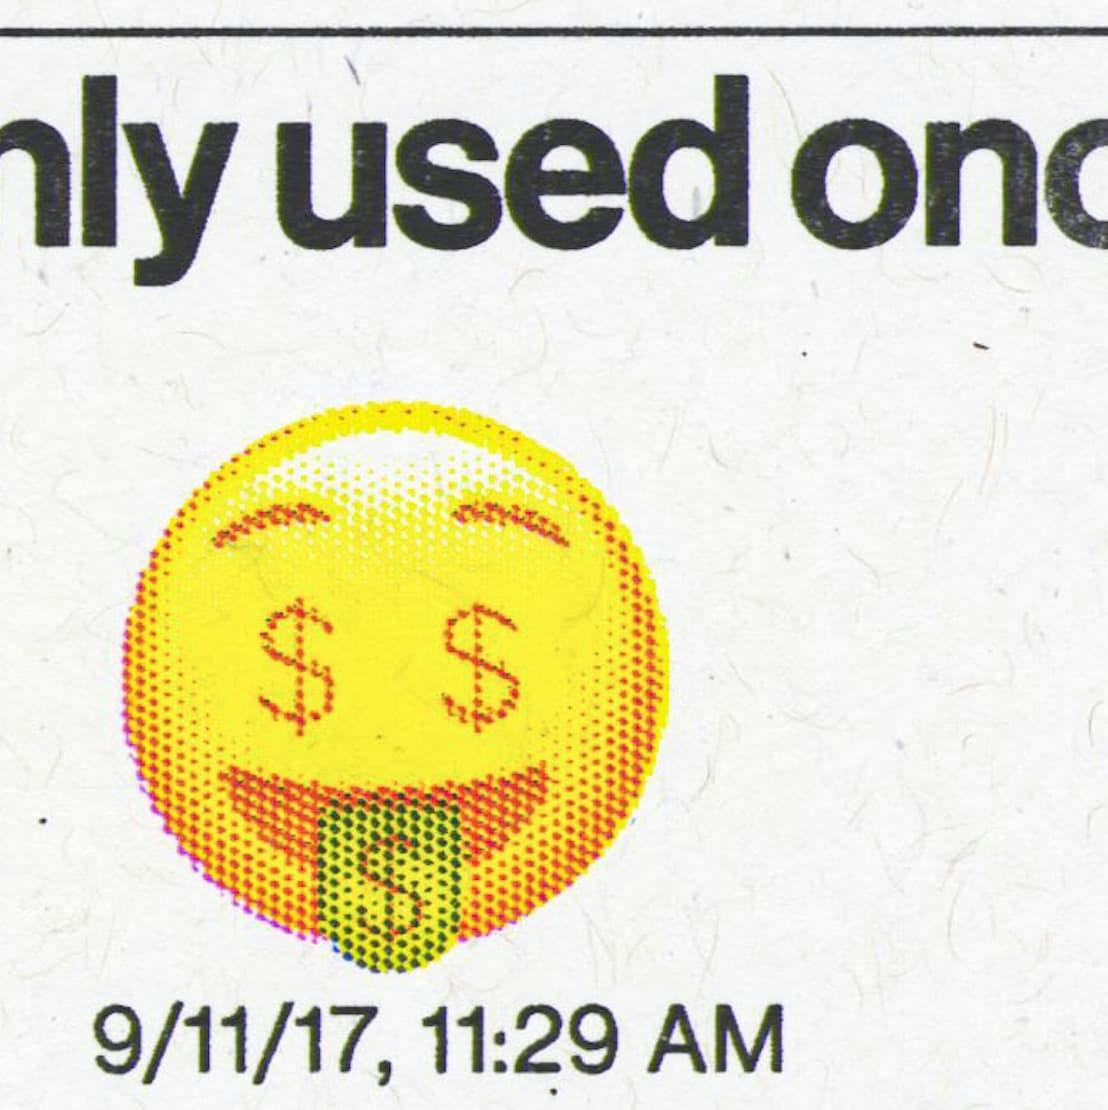 Macro shot of a yellow emoji with dollar signs for eyes and a smile. Caption below reads "only used once" and a timestamp "9/11/17, 11:29 AM", highlighting the print quality of the risograph.